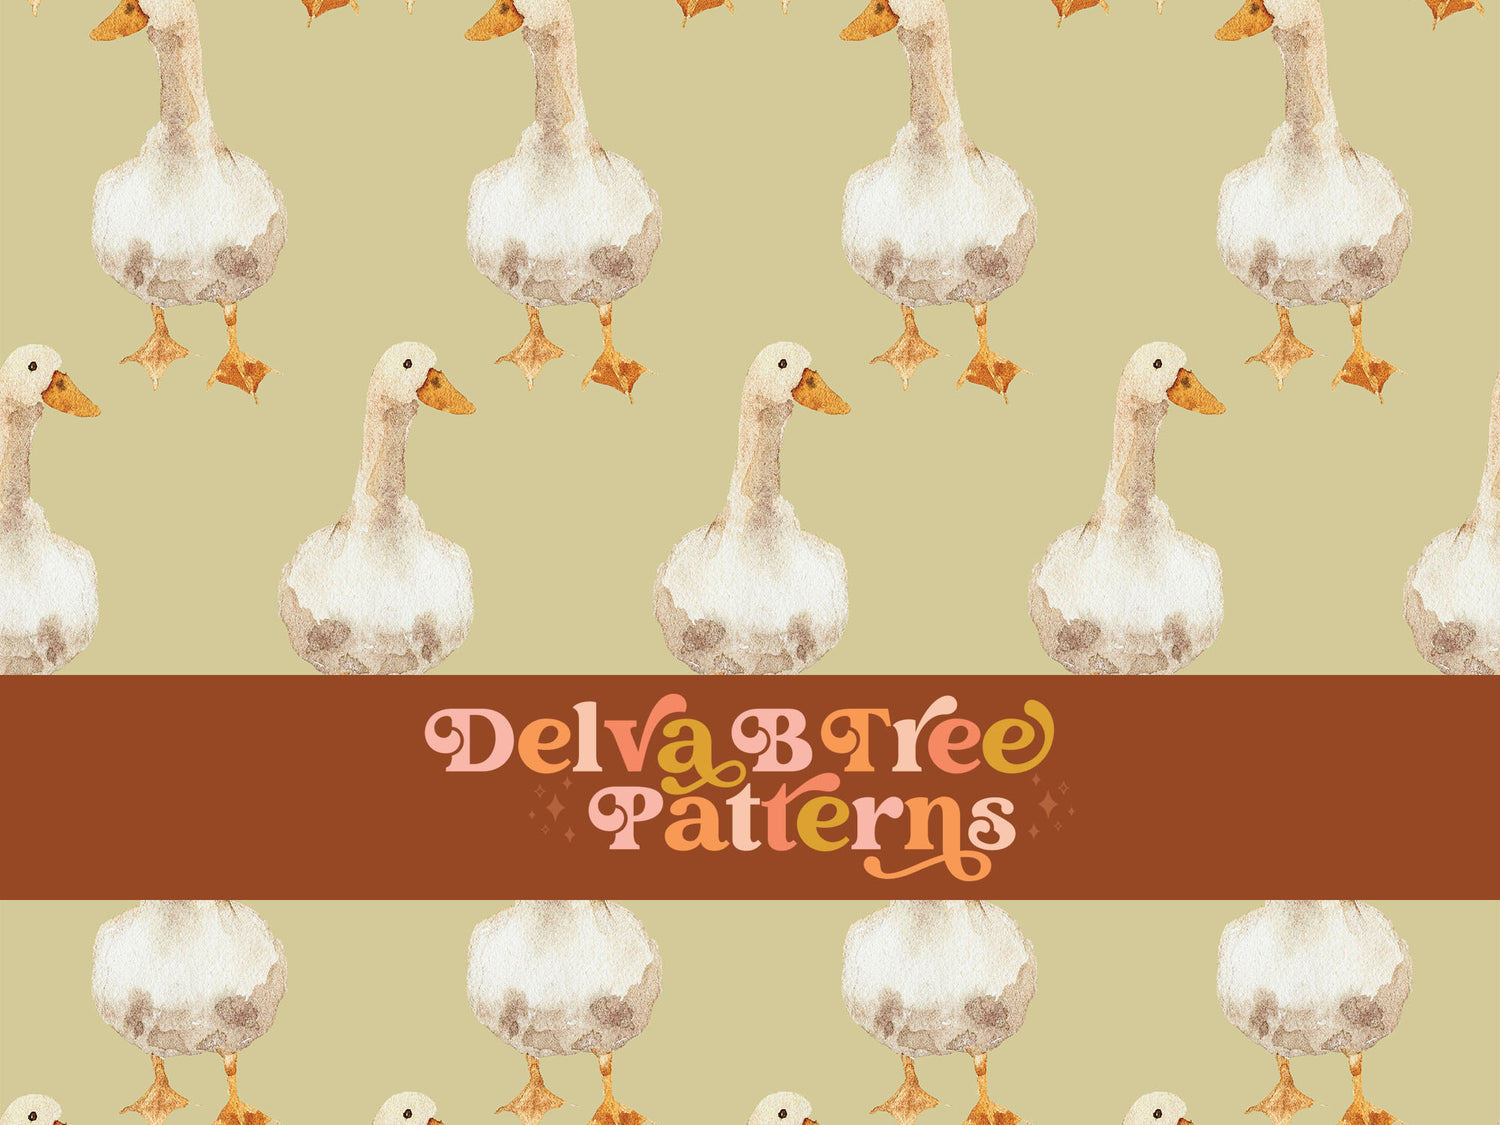 Watercolor geese on a dusty yellow background seamless file for fabric printing. Gender Neutral retro goose repeat pattern for textiles, polymailers, baby boy lovey blankets, nursery crib bedding, kids clothing, girls hair accessories, home decor accents, pet products.